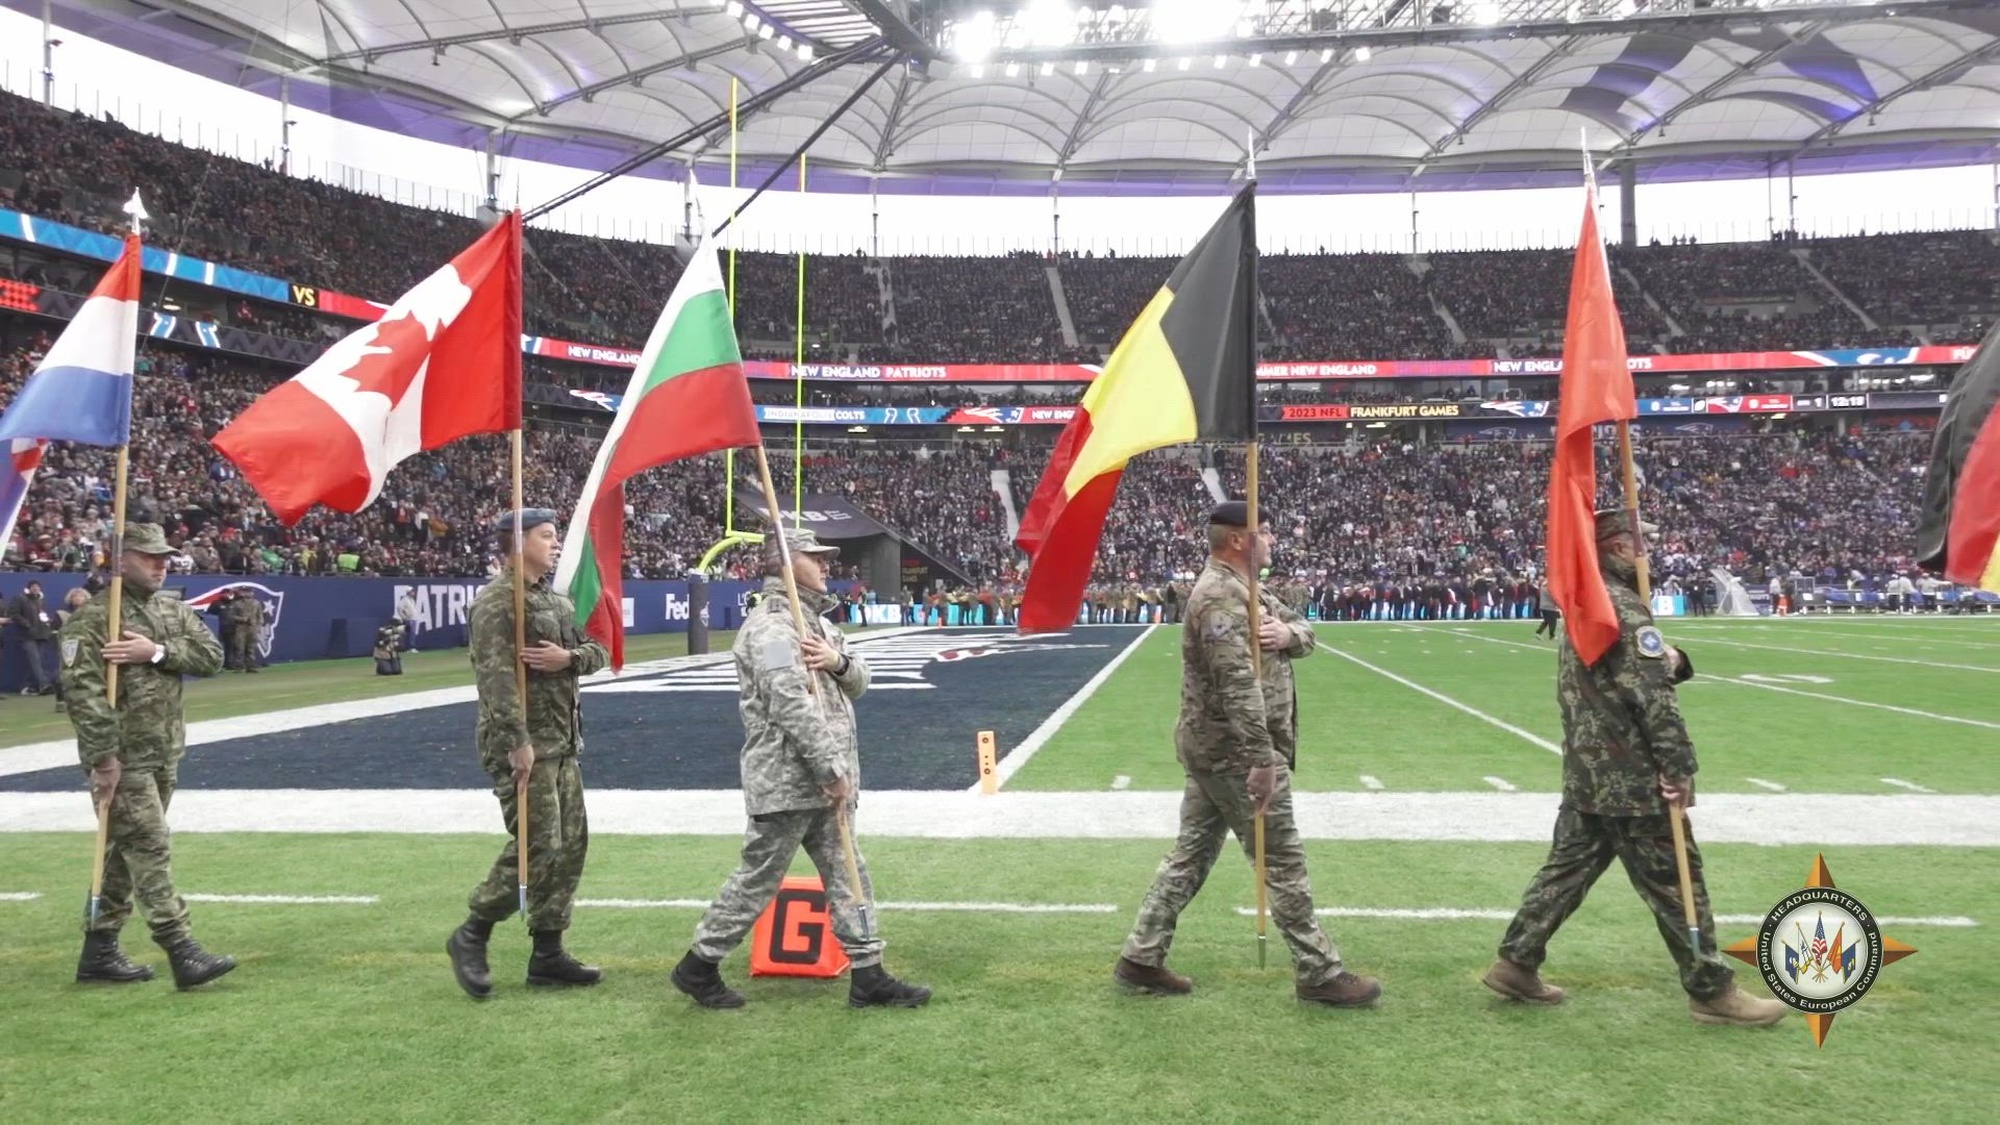 Thirty-two service members representing NATO countries participated in the opening ceremony for an NFL Frankfurt football game, held Nov. 12, 2023, in Frankfurt, Germany. The color guard represented NATO's unity and collective resolve to deter aggression and defend the Euro-Atlantic region. (U.S. Army video by Staff Sgt. Aaron Daugherty)